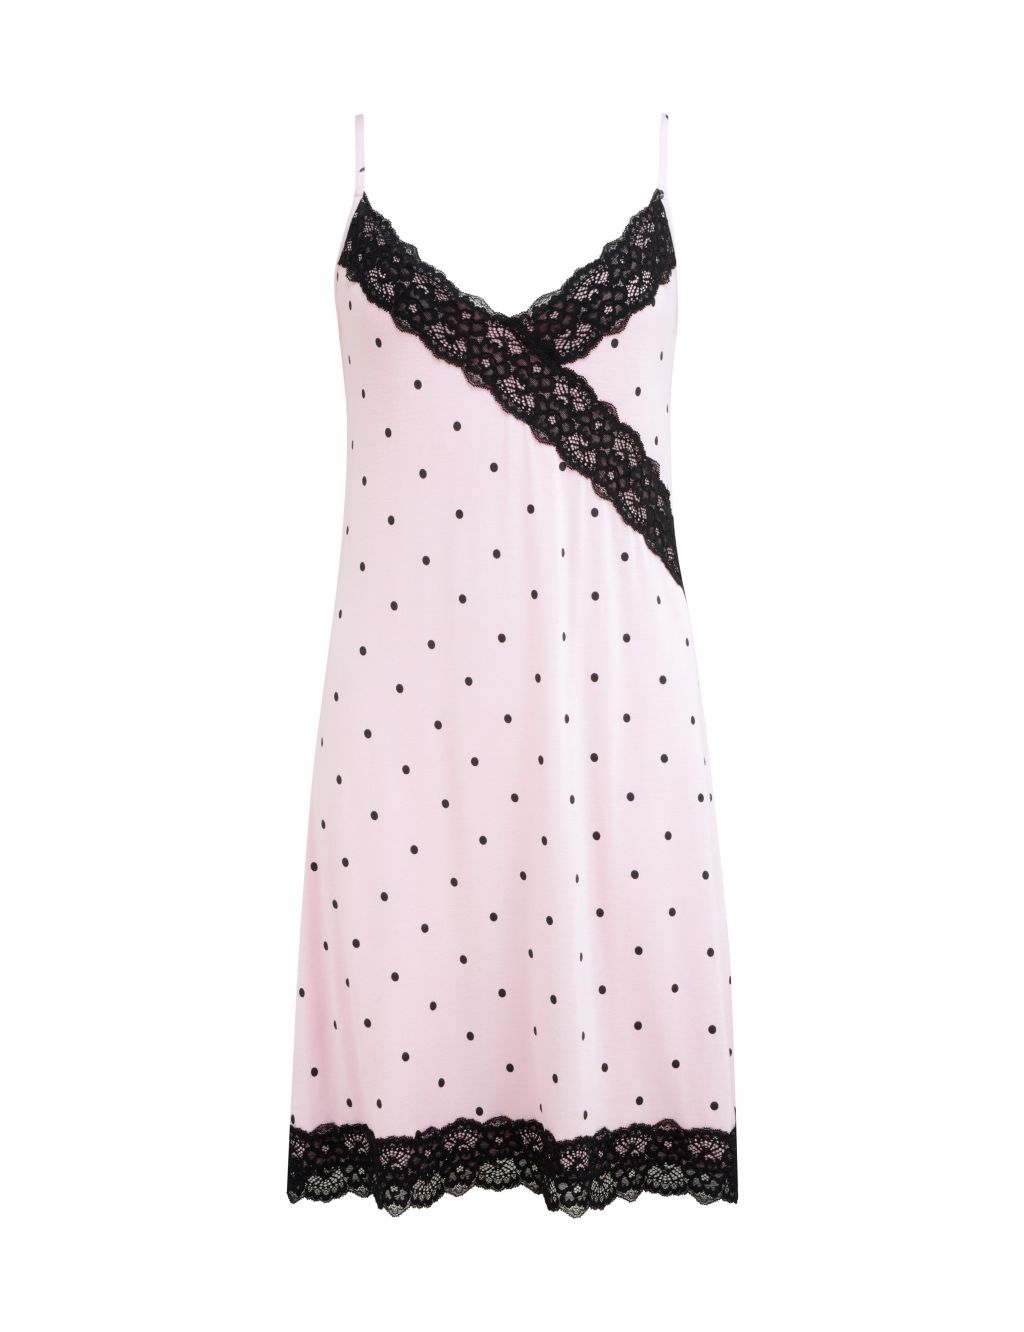 Sofa Loves Lace Jersey Polka Dot Hidden Support Chemise 1 of 5